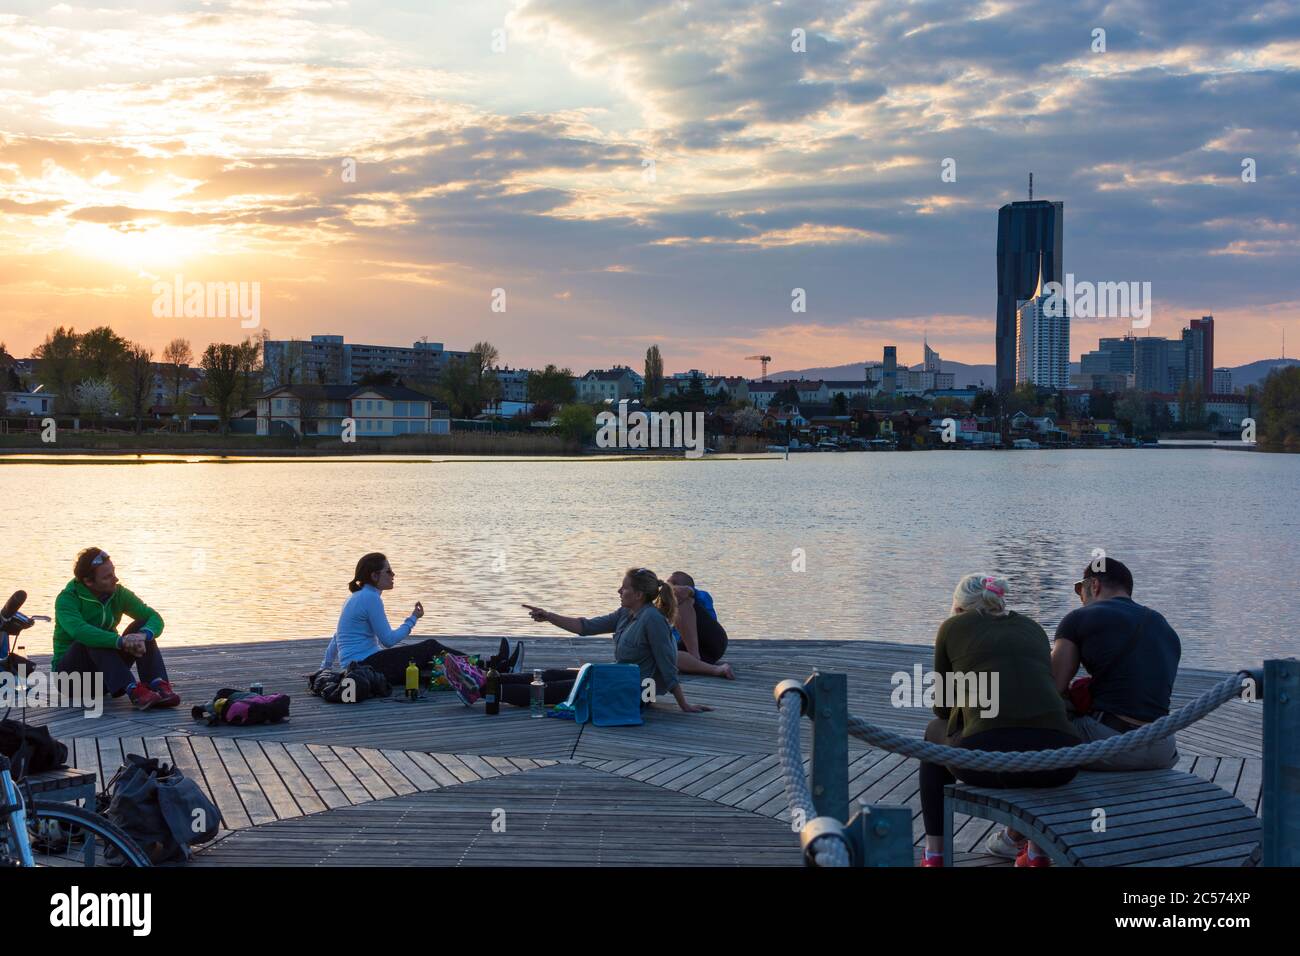 Vienna, people sitting at benches at wooden platforms at river Alte Donau (Old Danube) at sunset, in 22. Donaustadt, Wien, Austria Stock Photo